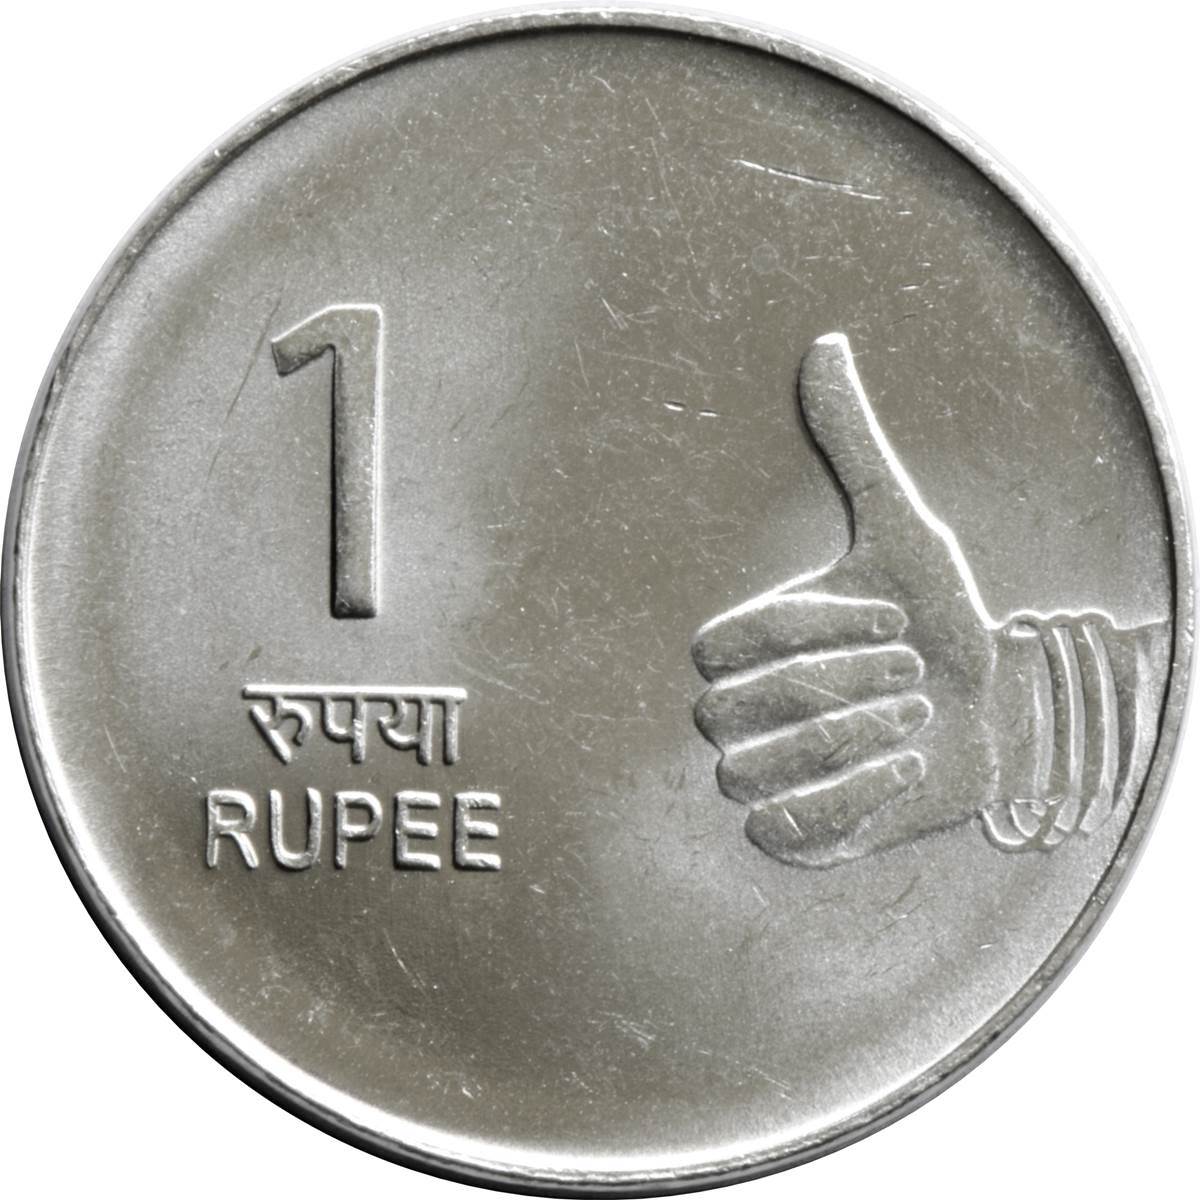 Work Hard And Be Nice To People 1 Rupee Coin